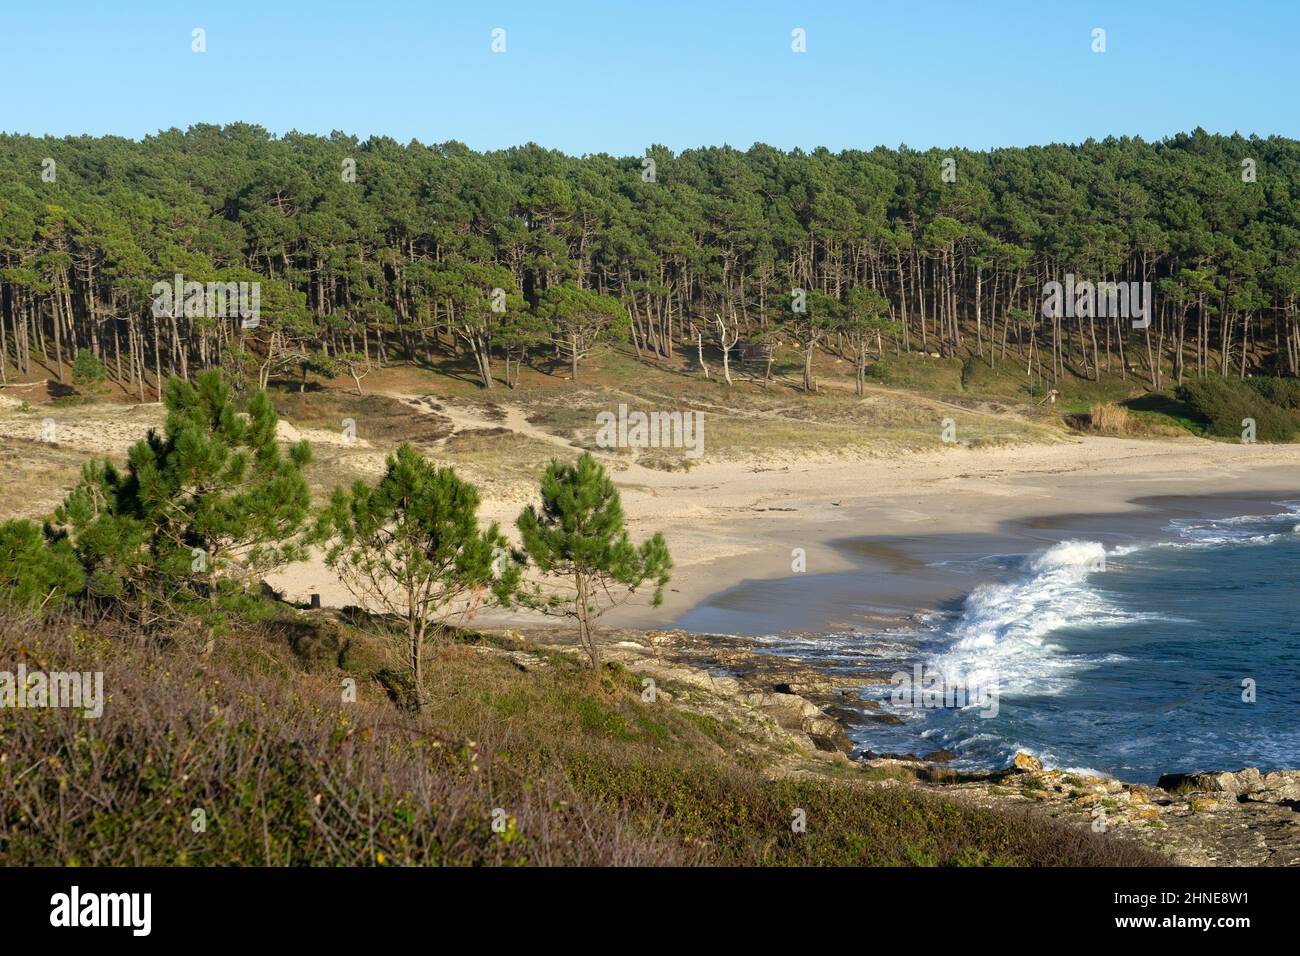 Melide beach surrounded by a pine forest in Home Cape natural zone at sunset in Rias Baixas. Pontevedra, Galicia, Spain. Stock Photo